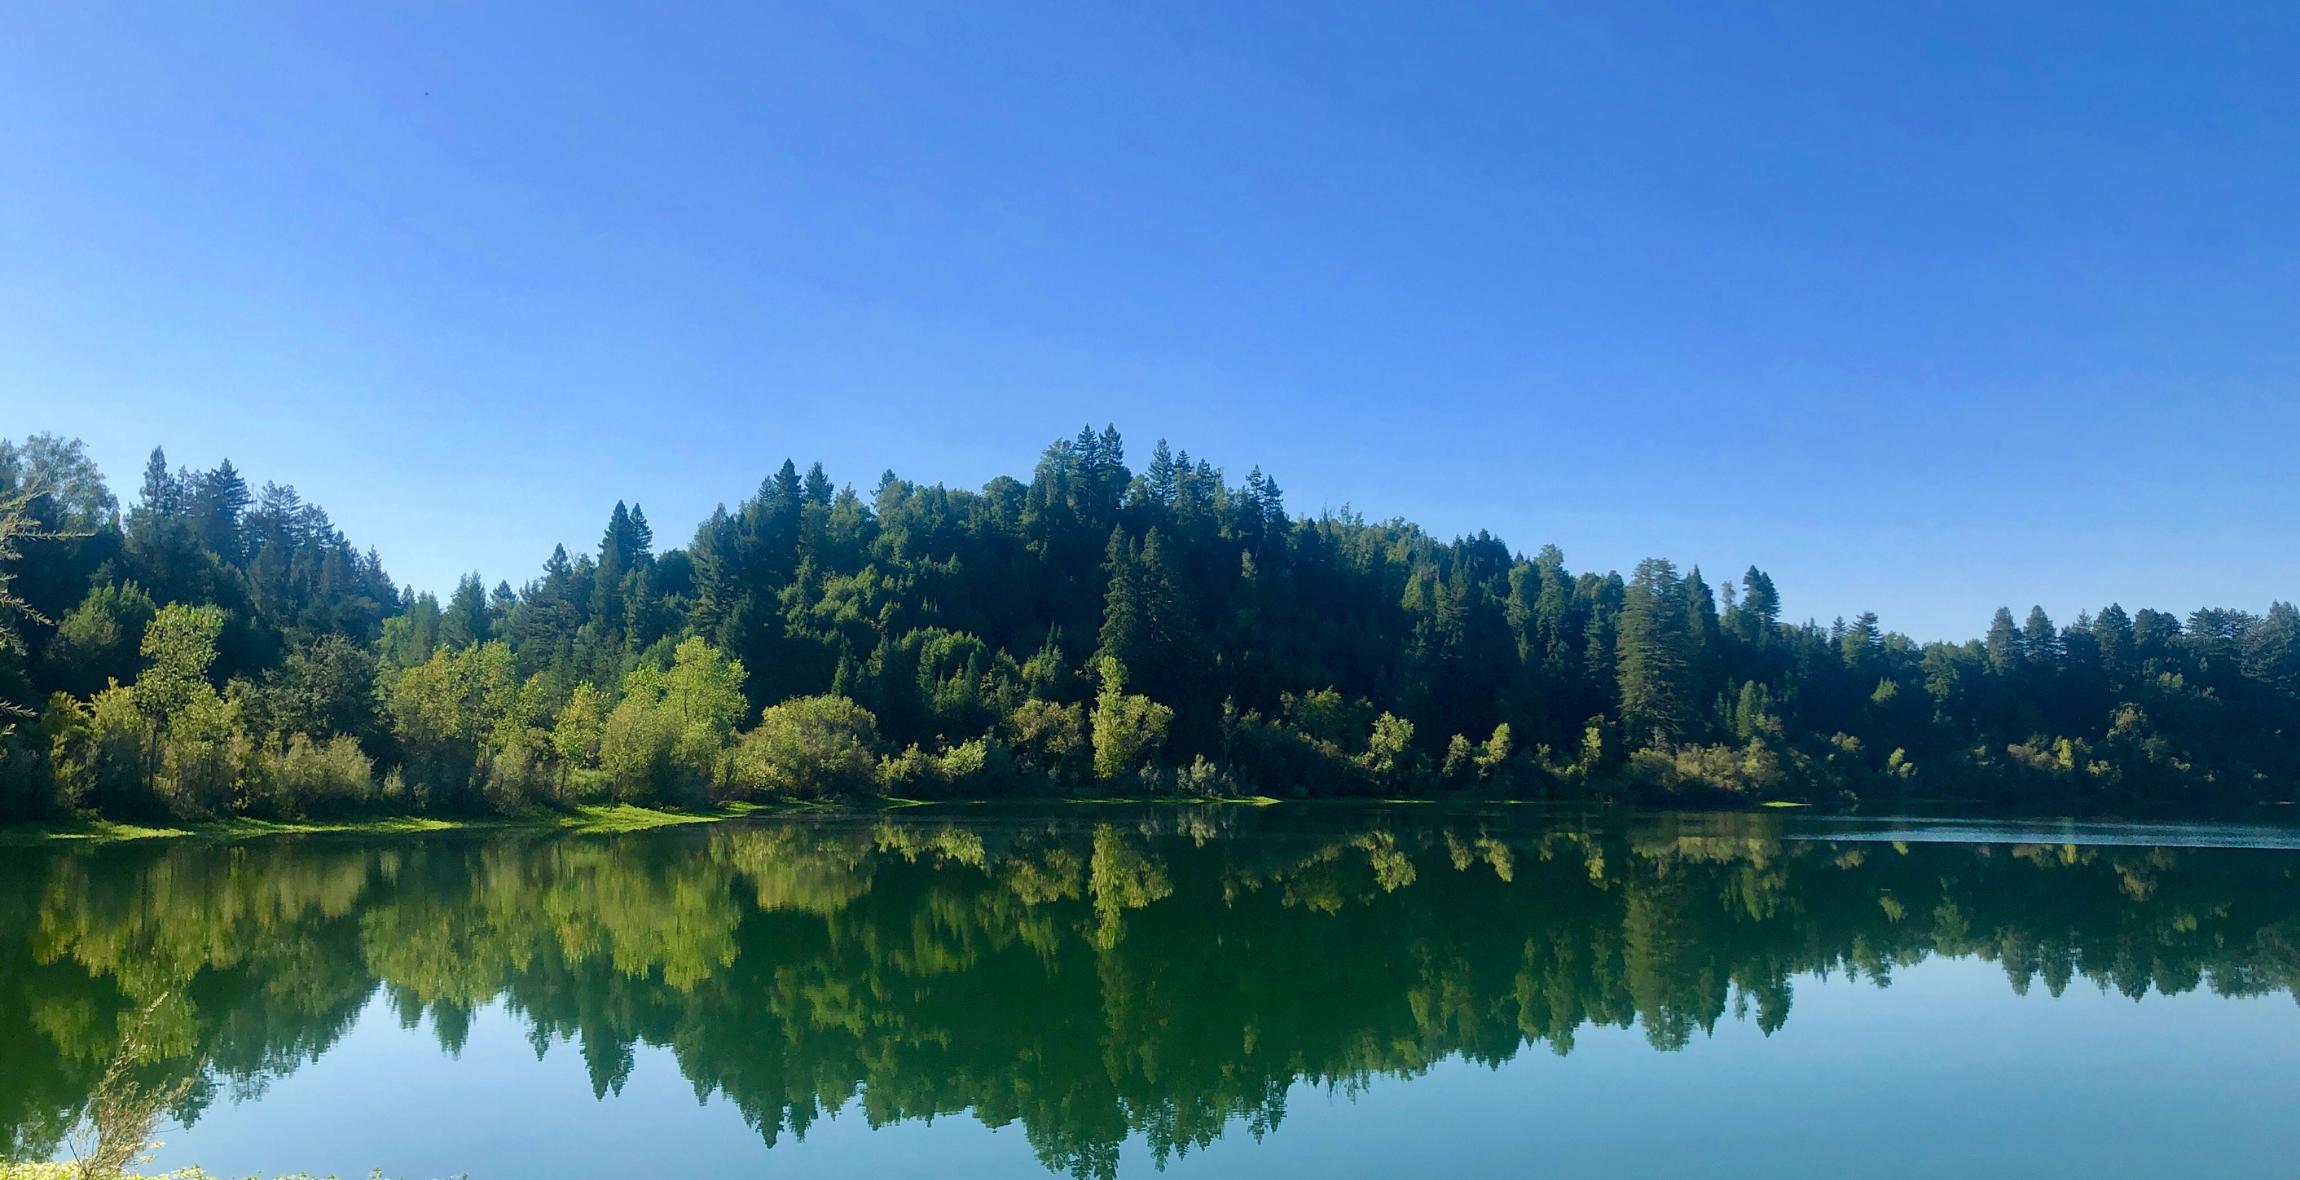 Trees are reflected on a glassy blue lake in California